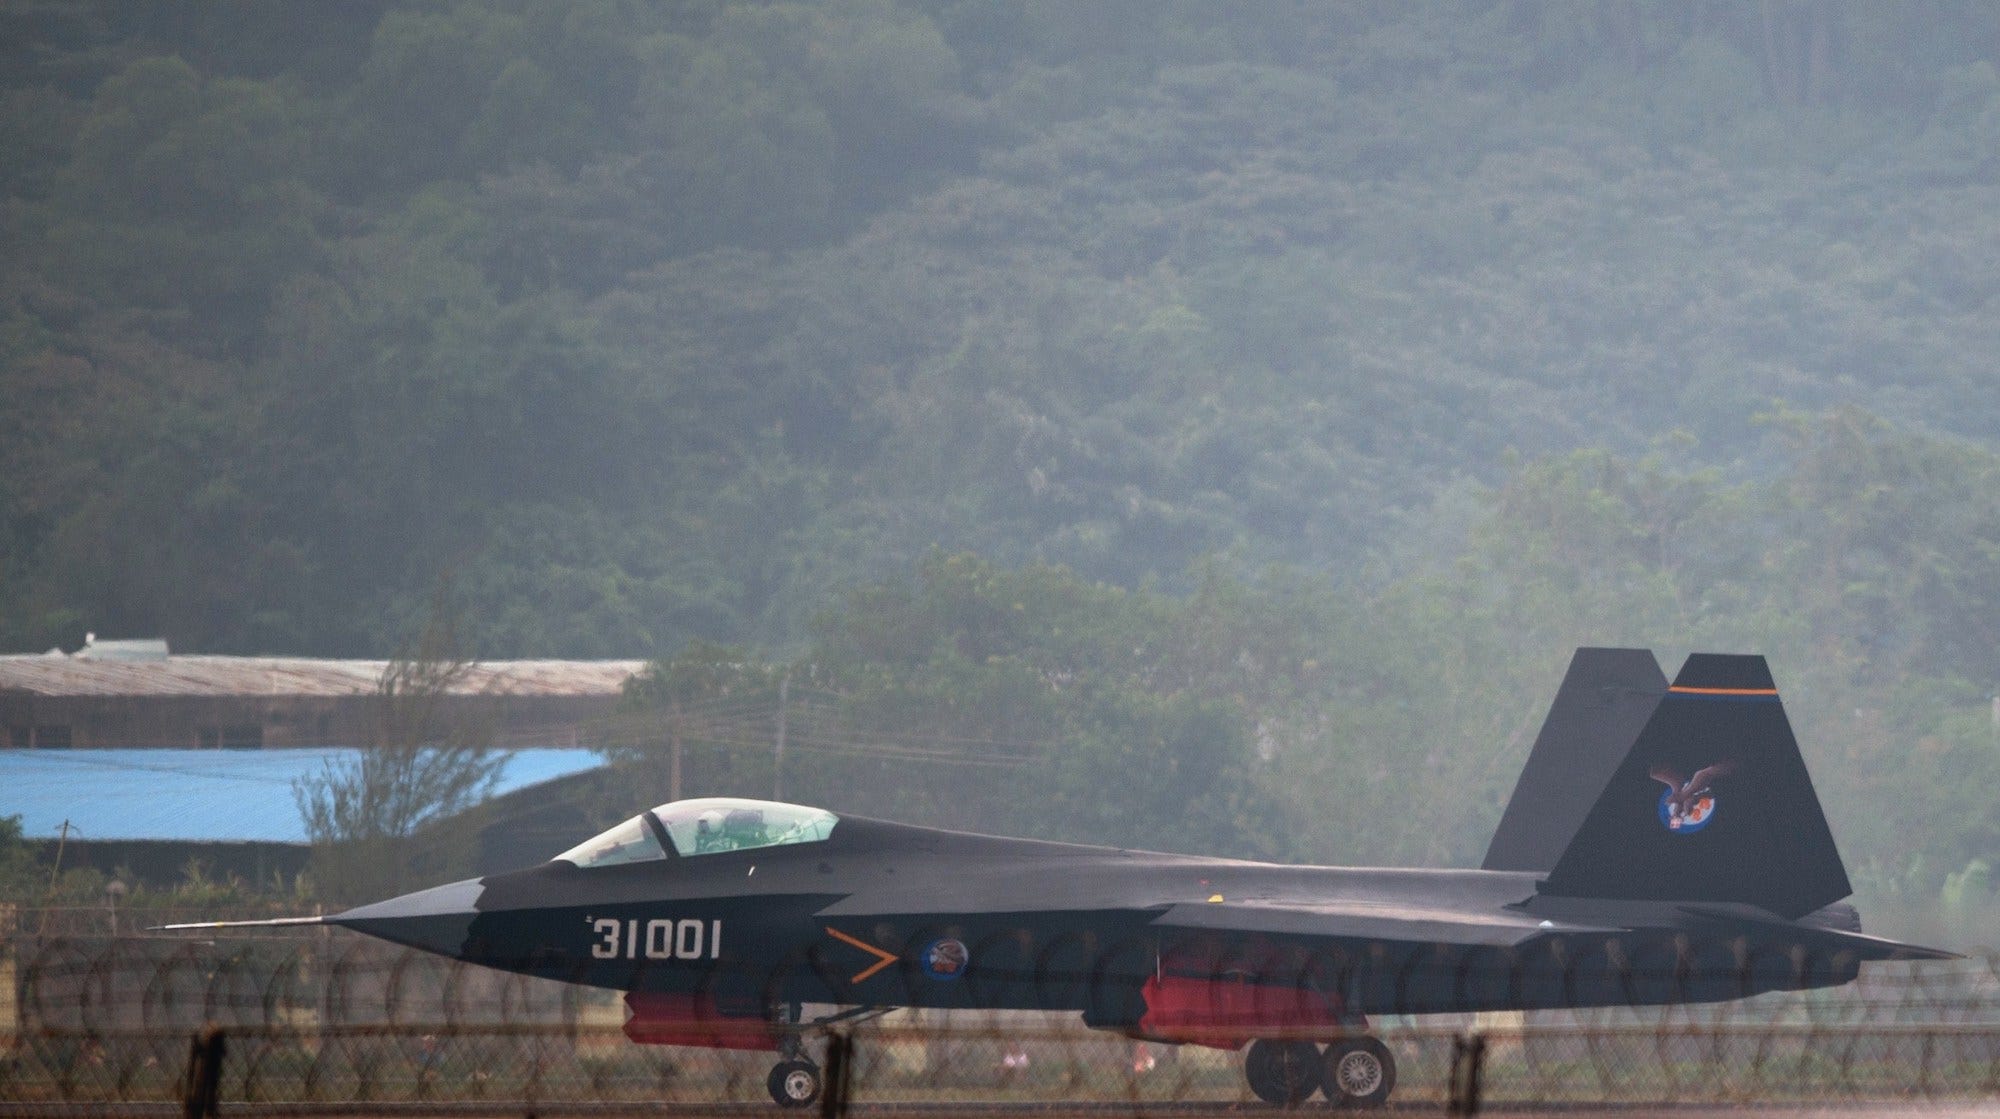 A Chinese FC-31 J-31 stealth fighter